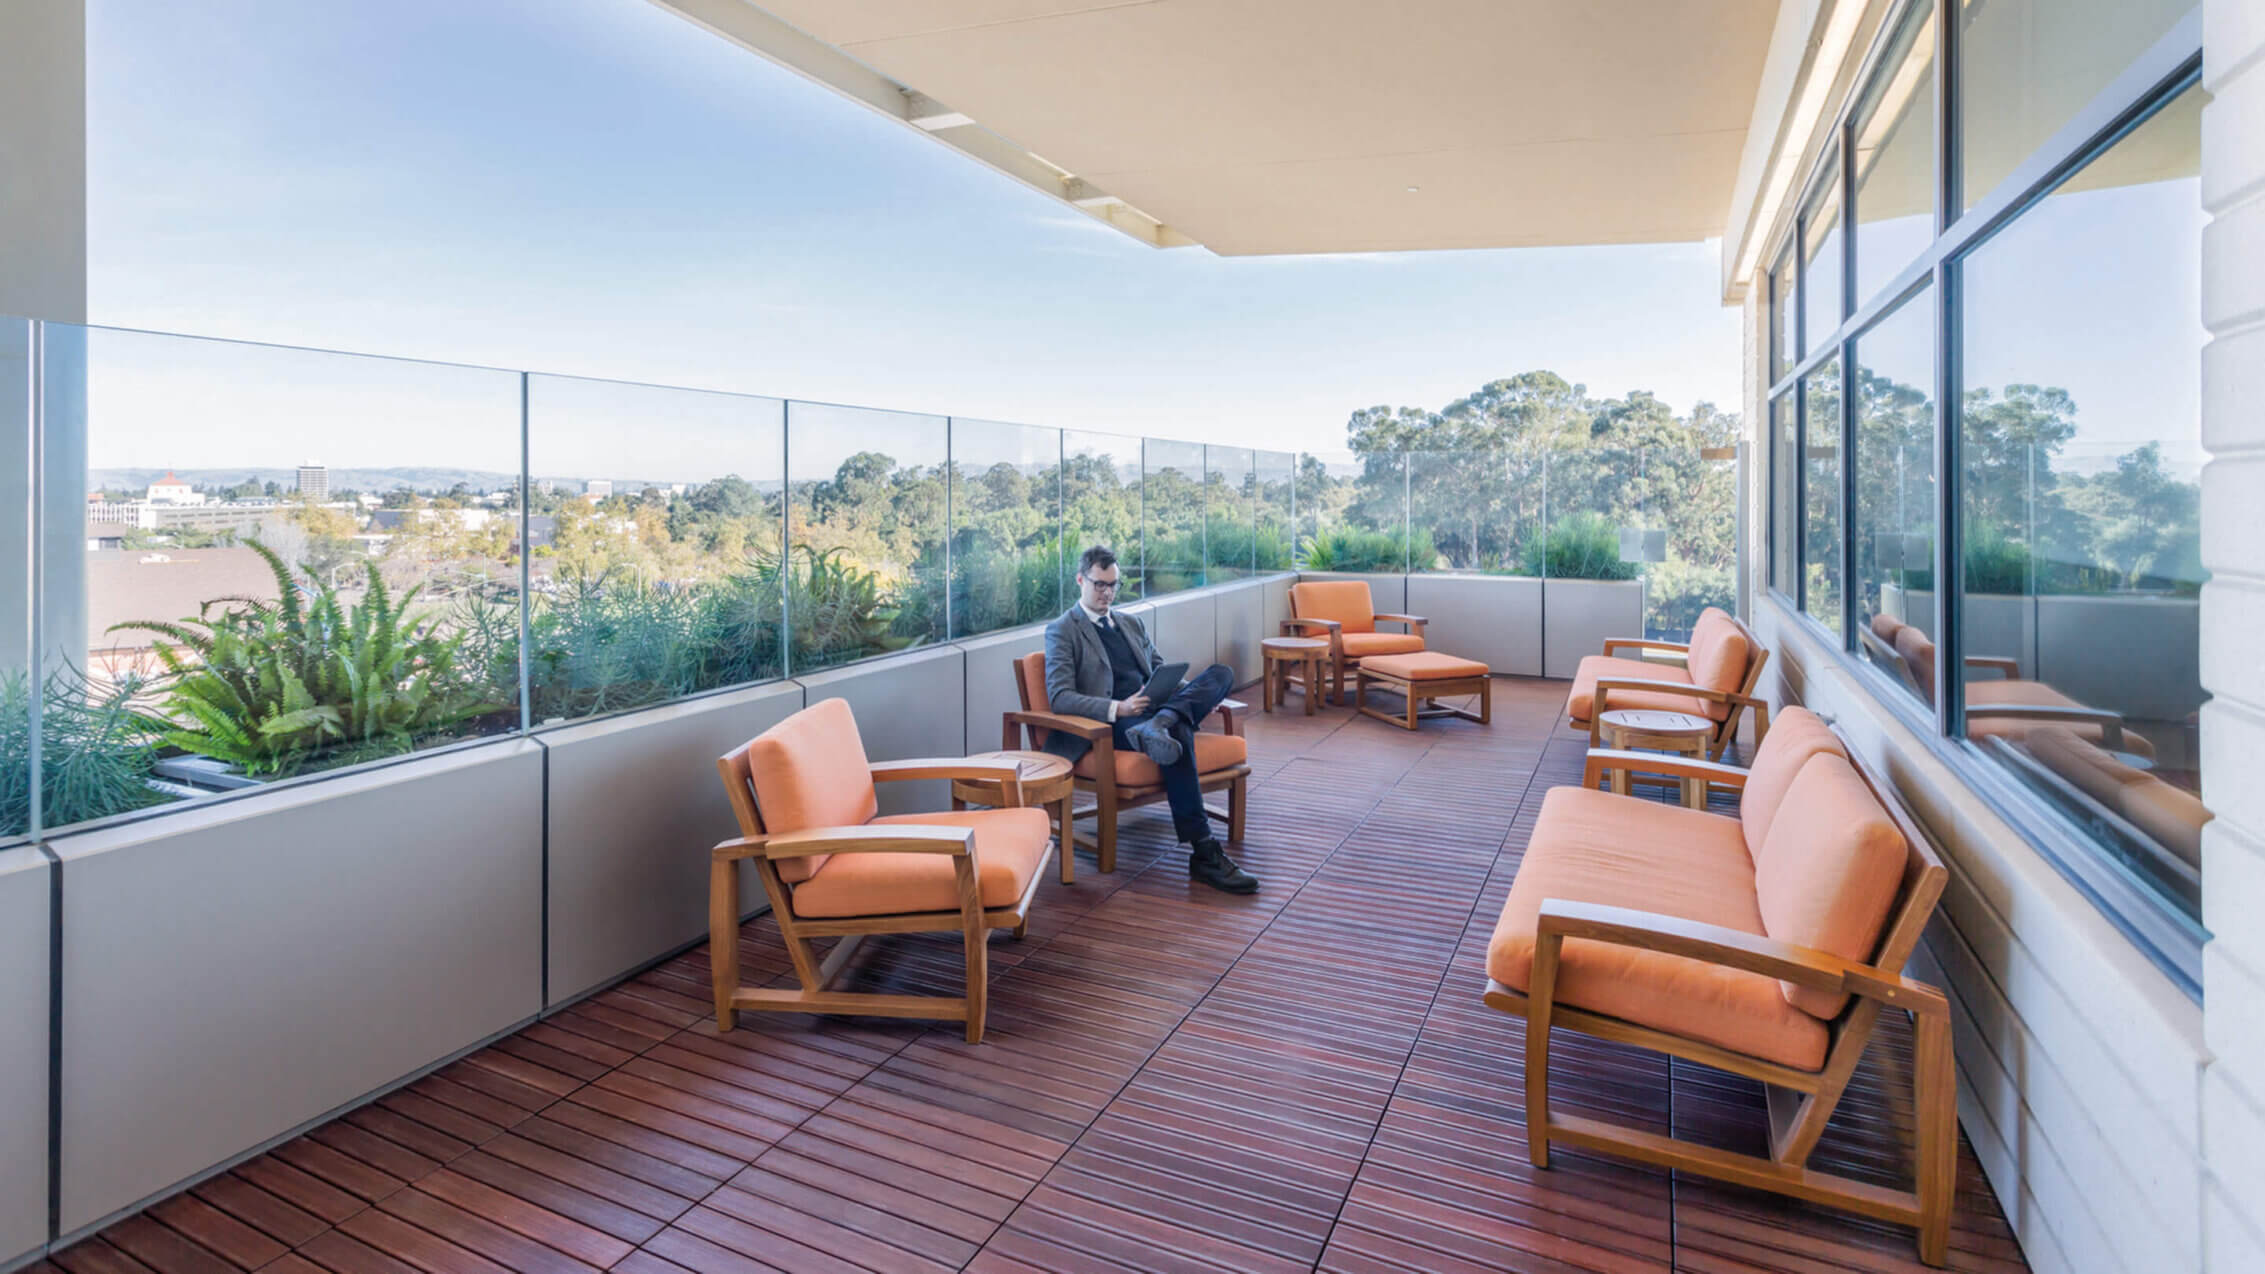 Photo of balcony adjacent to hospital staff lounge with trees and distant views